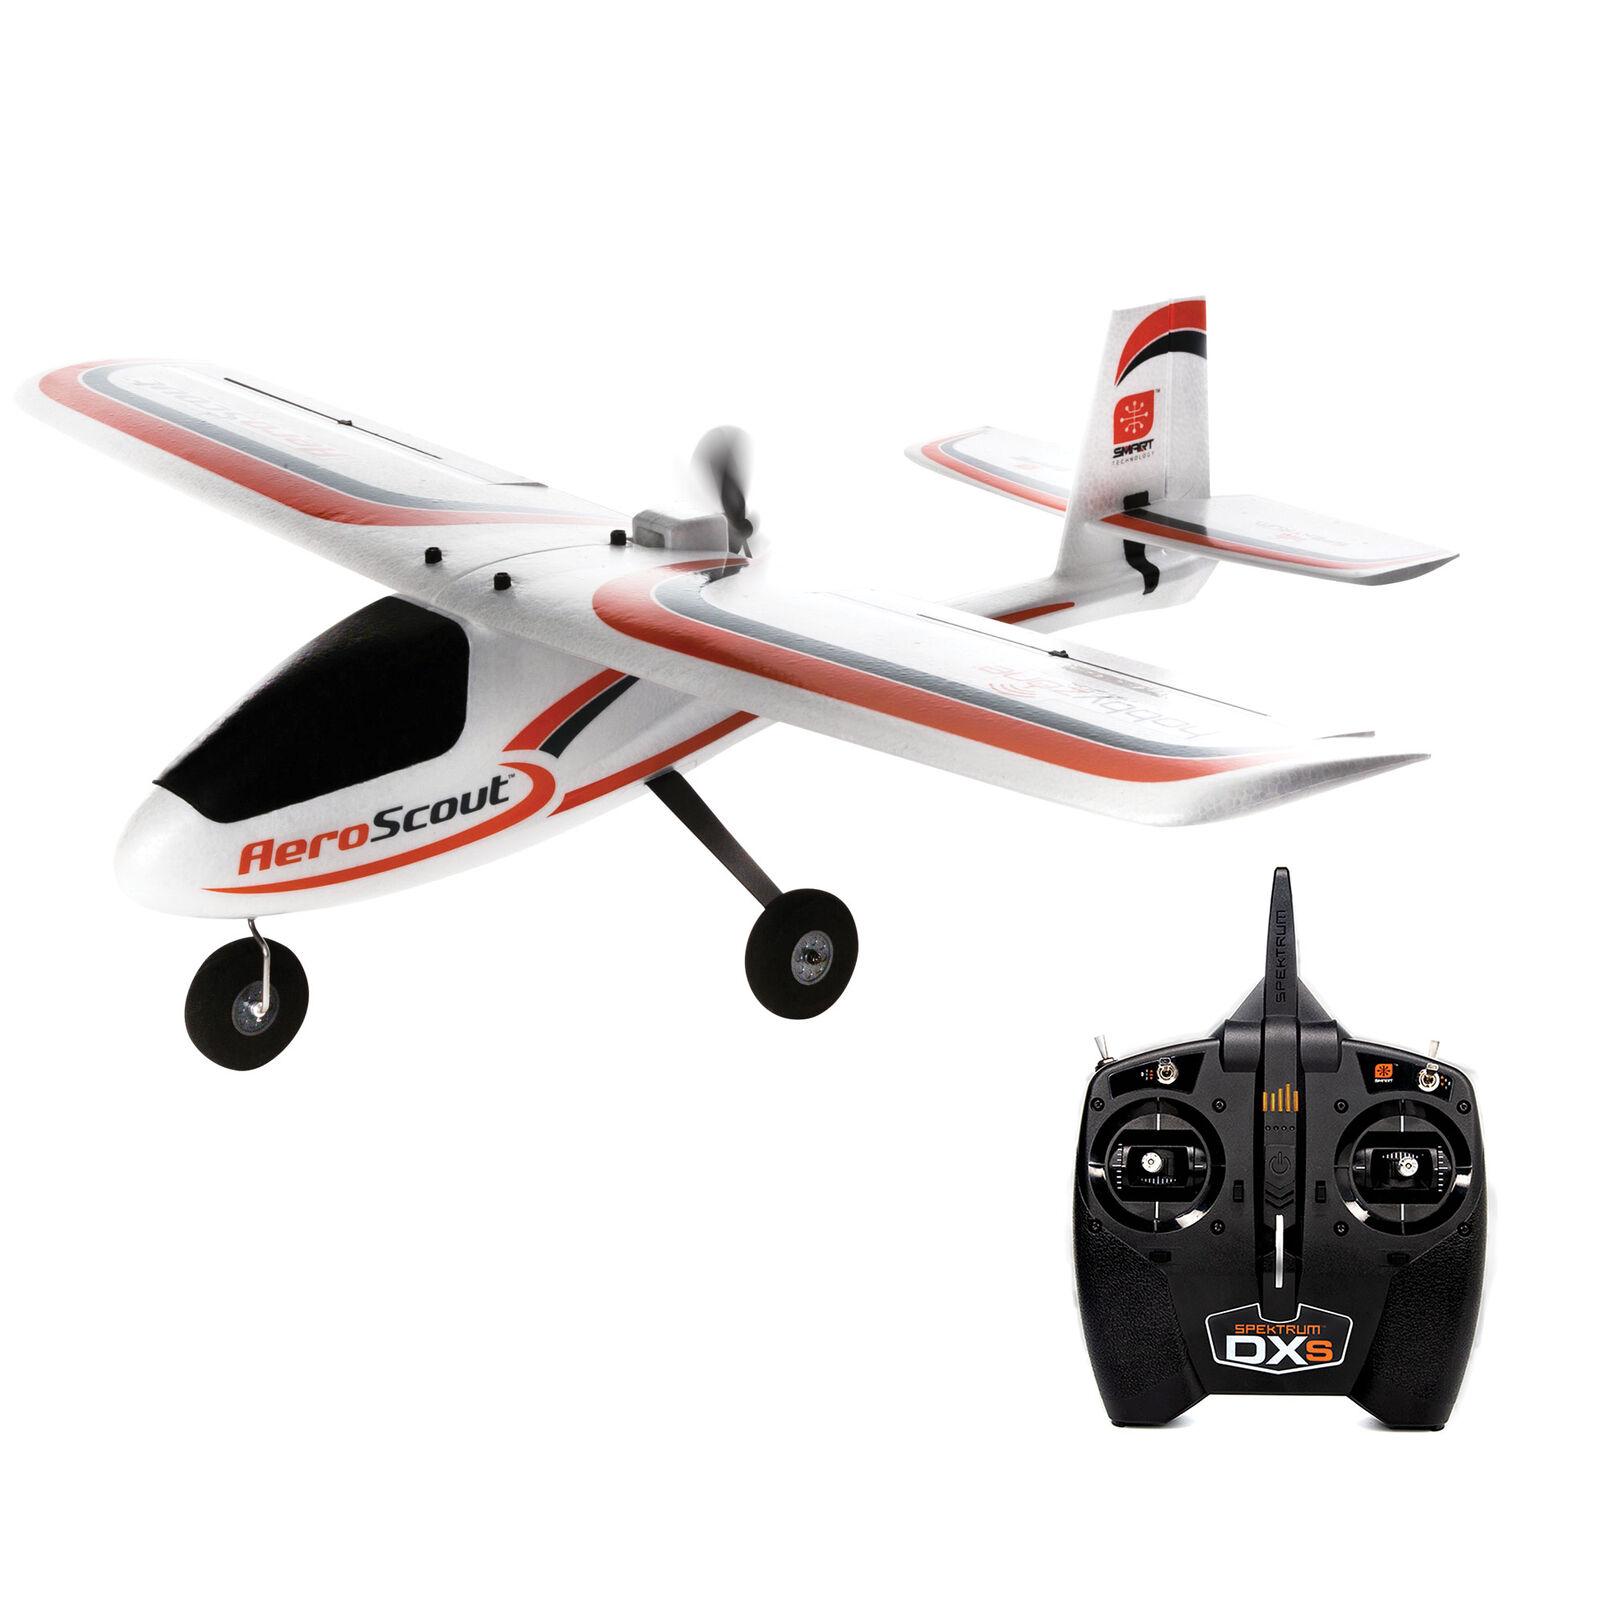 Aeroscout Rc Plane Rtf: Top Features of the AeroScout RC Plane RTF